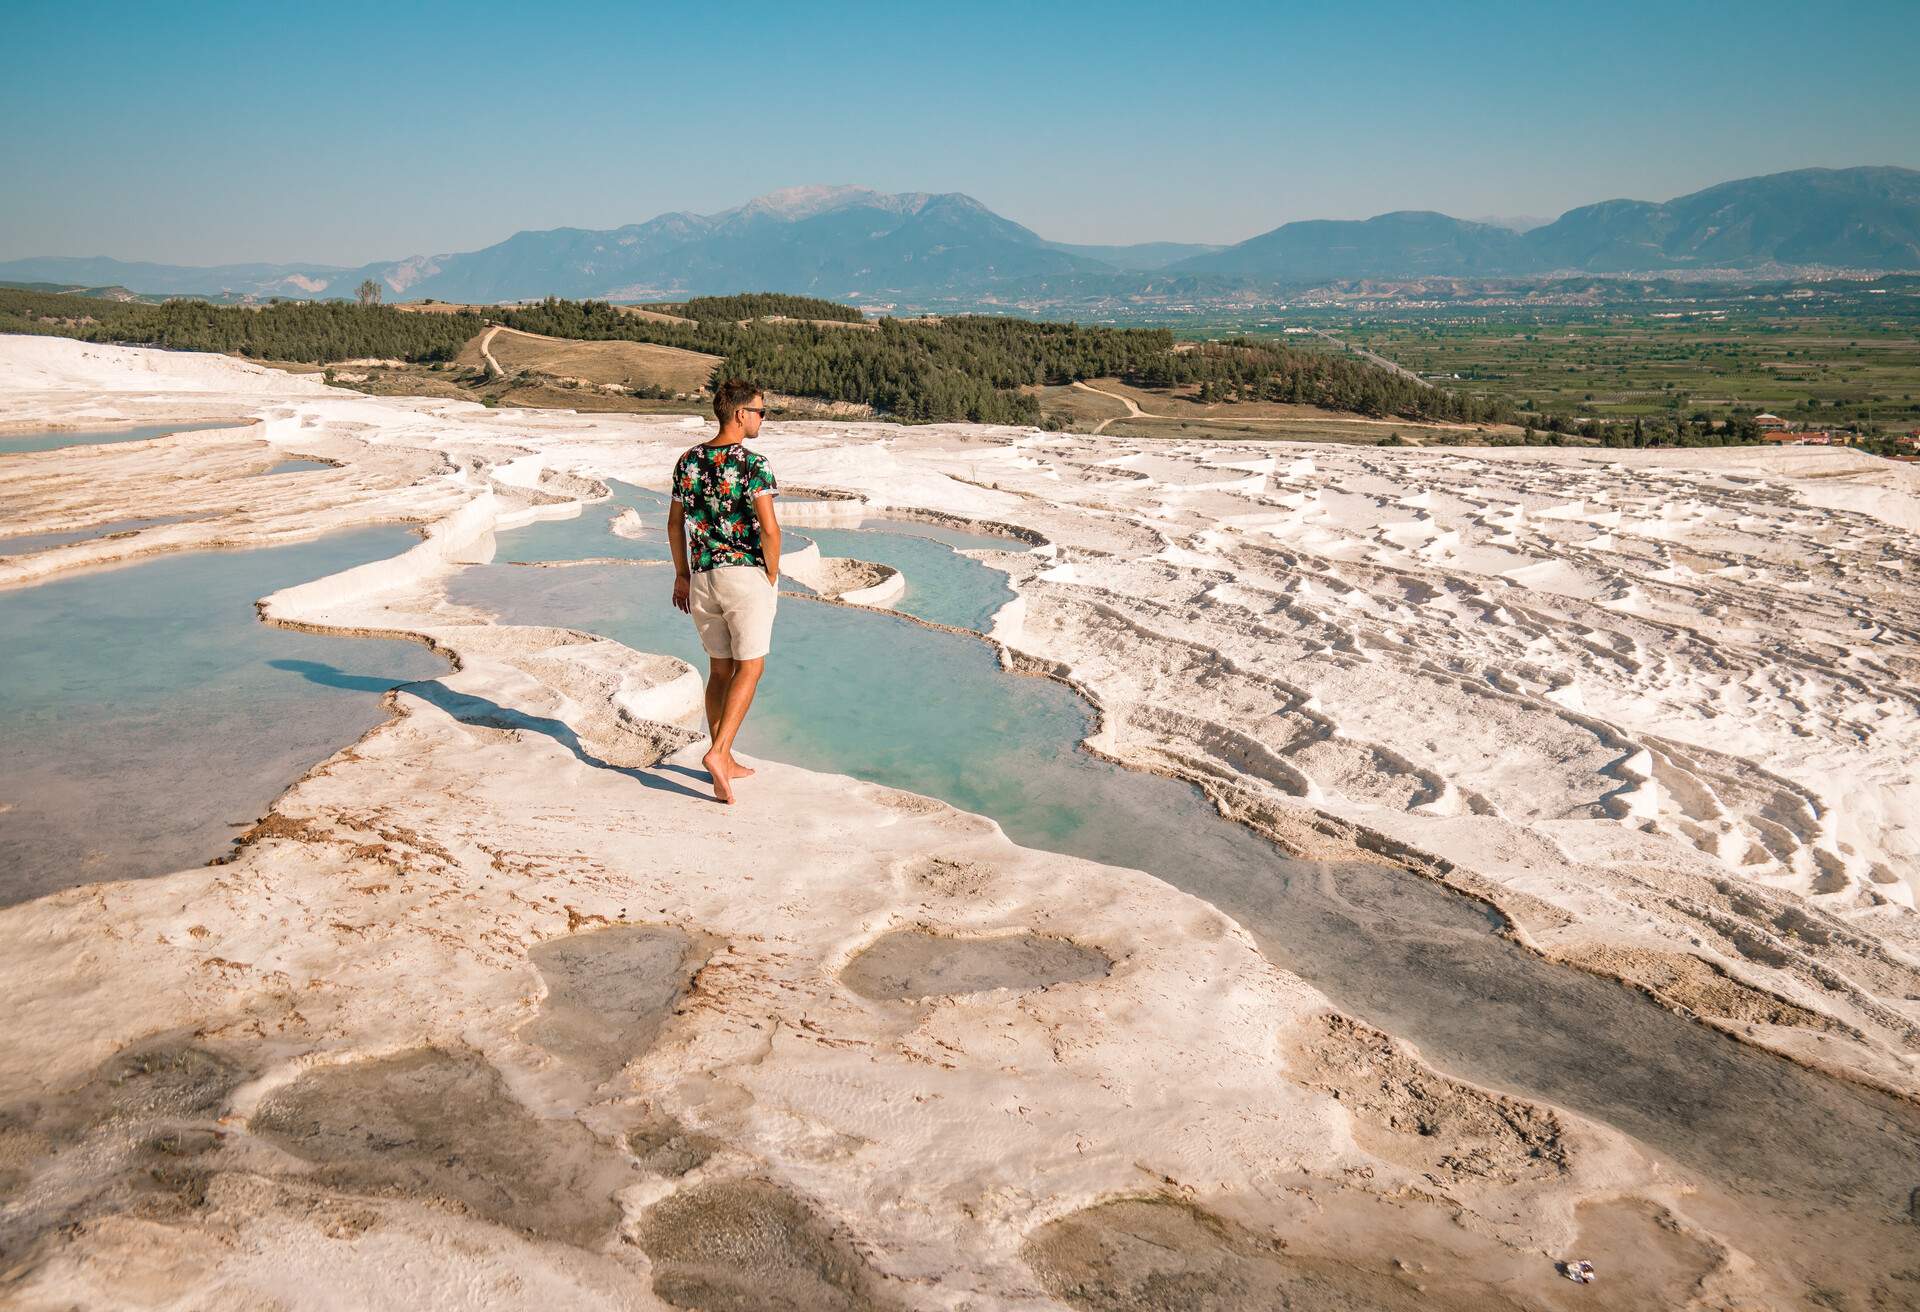 Natural travertine pools and terraces in Pamukkale. Cotton castle in southwestern Turkey, young man walking at the pool in natural bath ; Shutterstock ID 1167275008; Brand (KAYAK, Momondo, Any): any